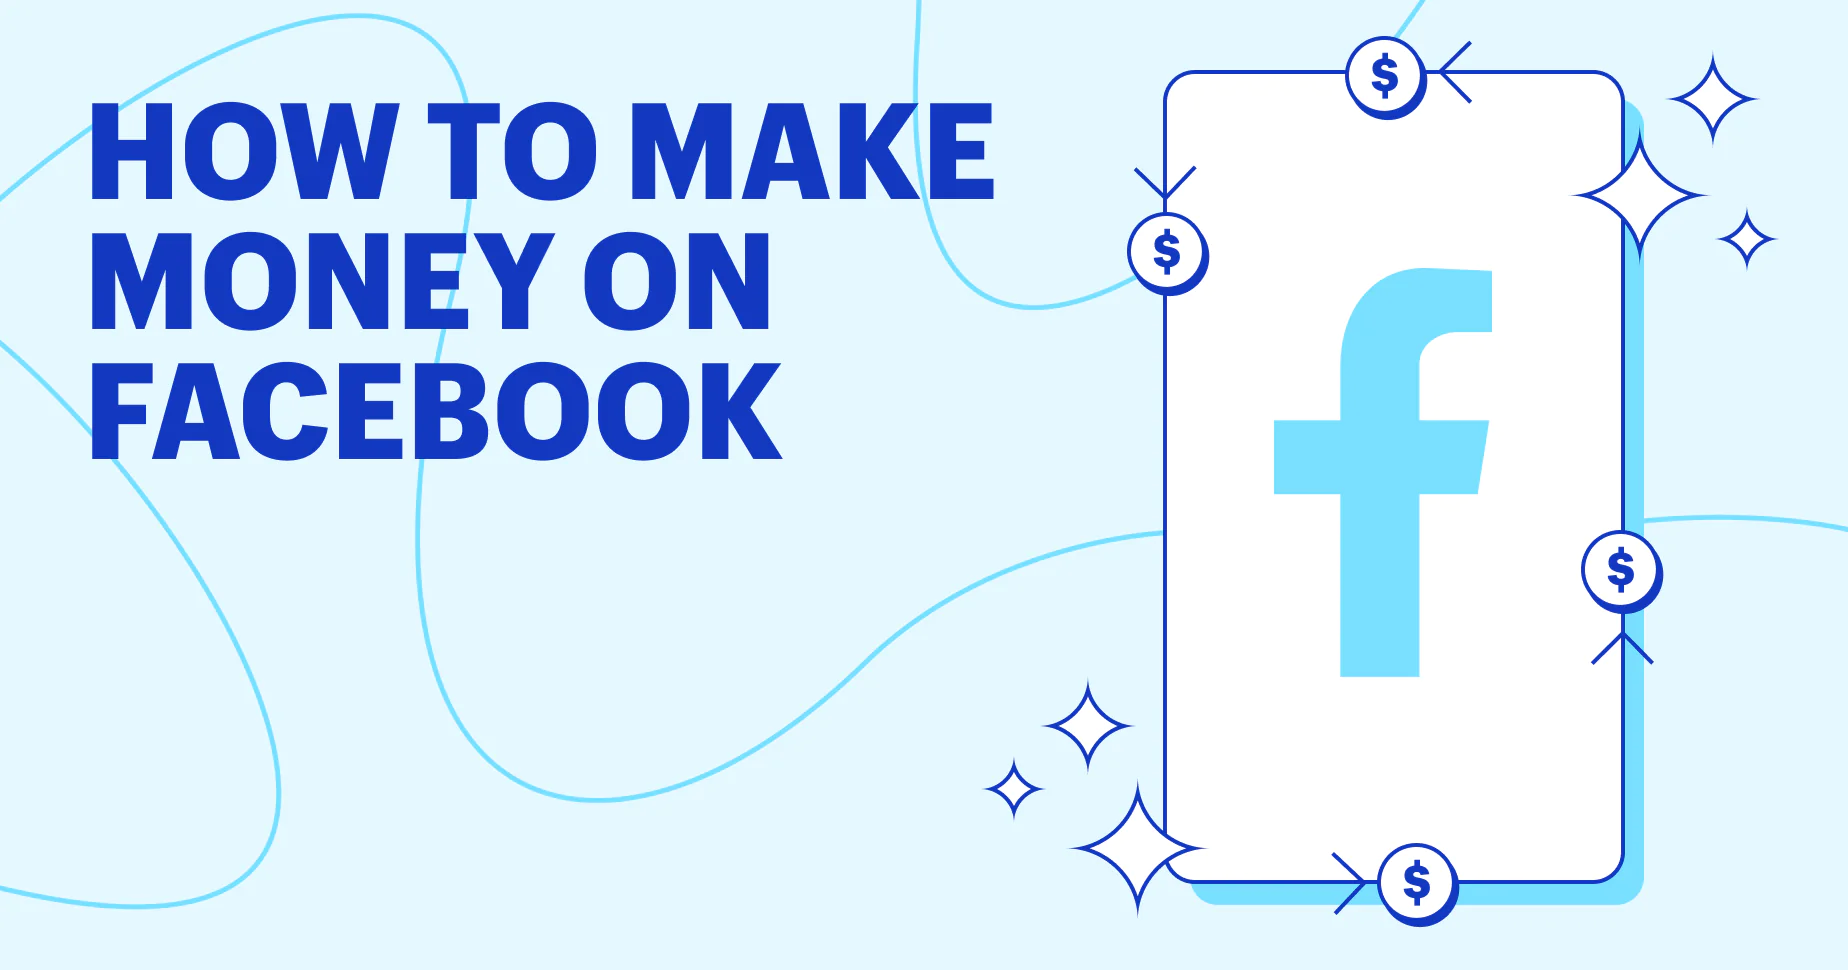 How to make money from Facebook page in Nigeria